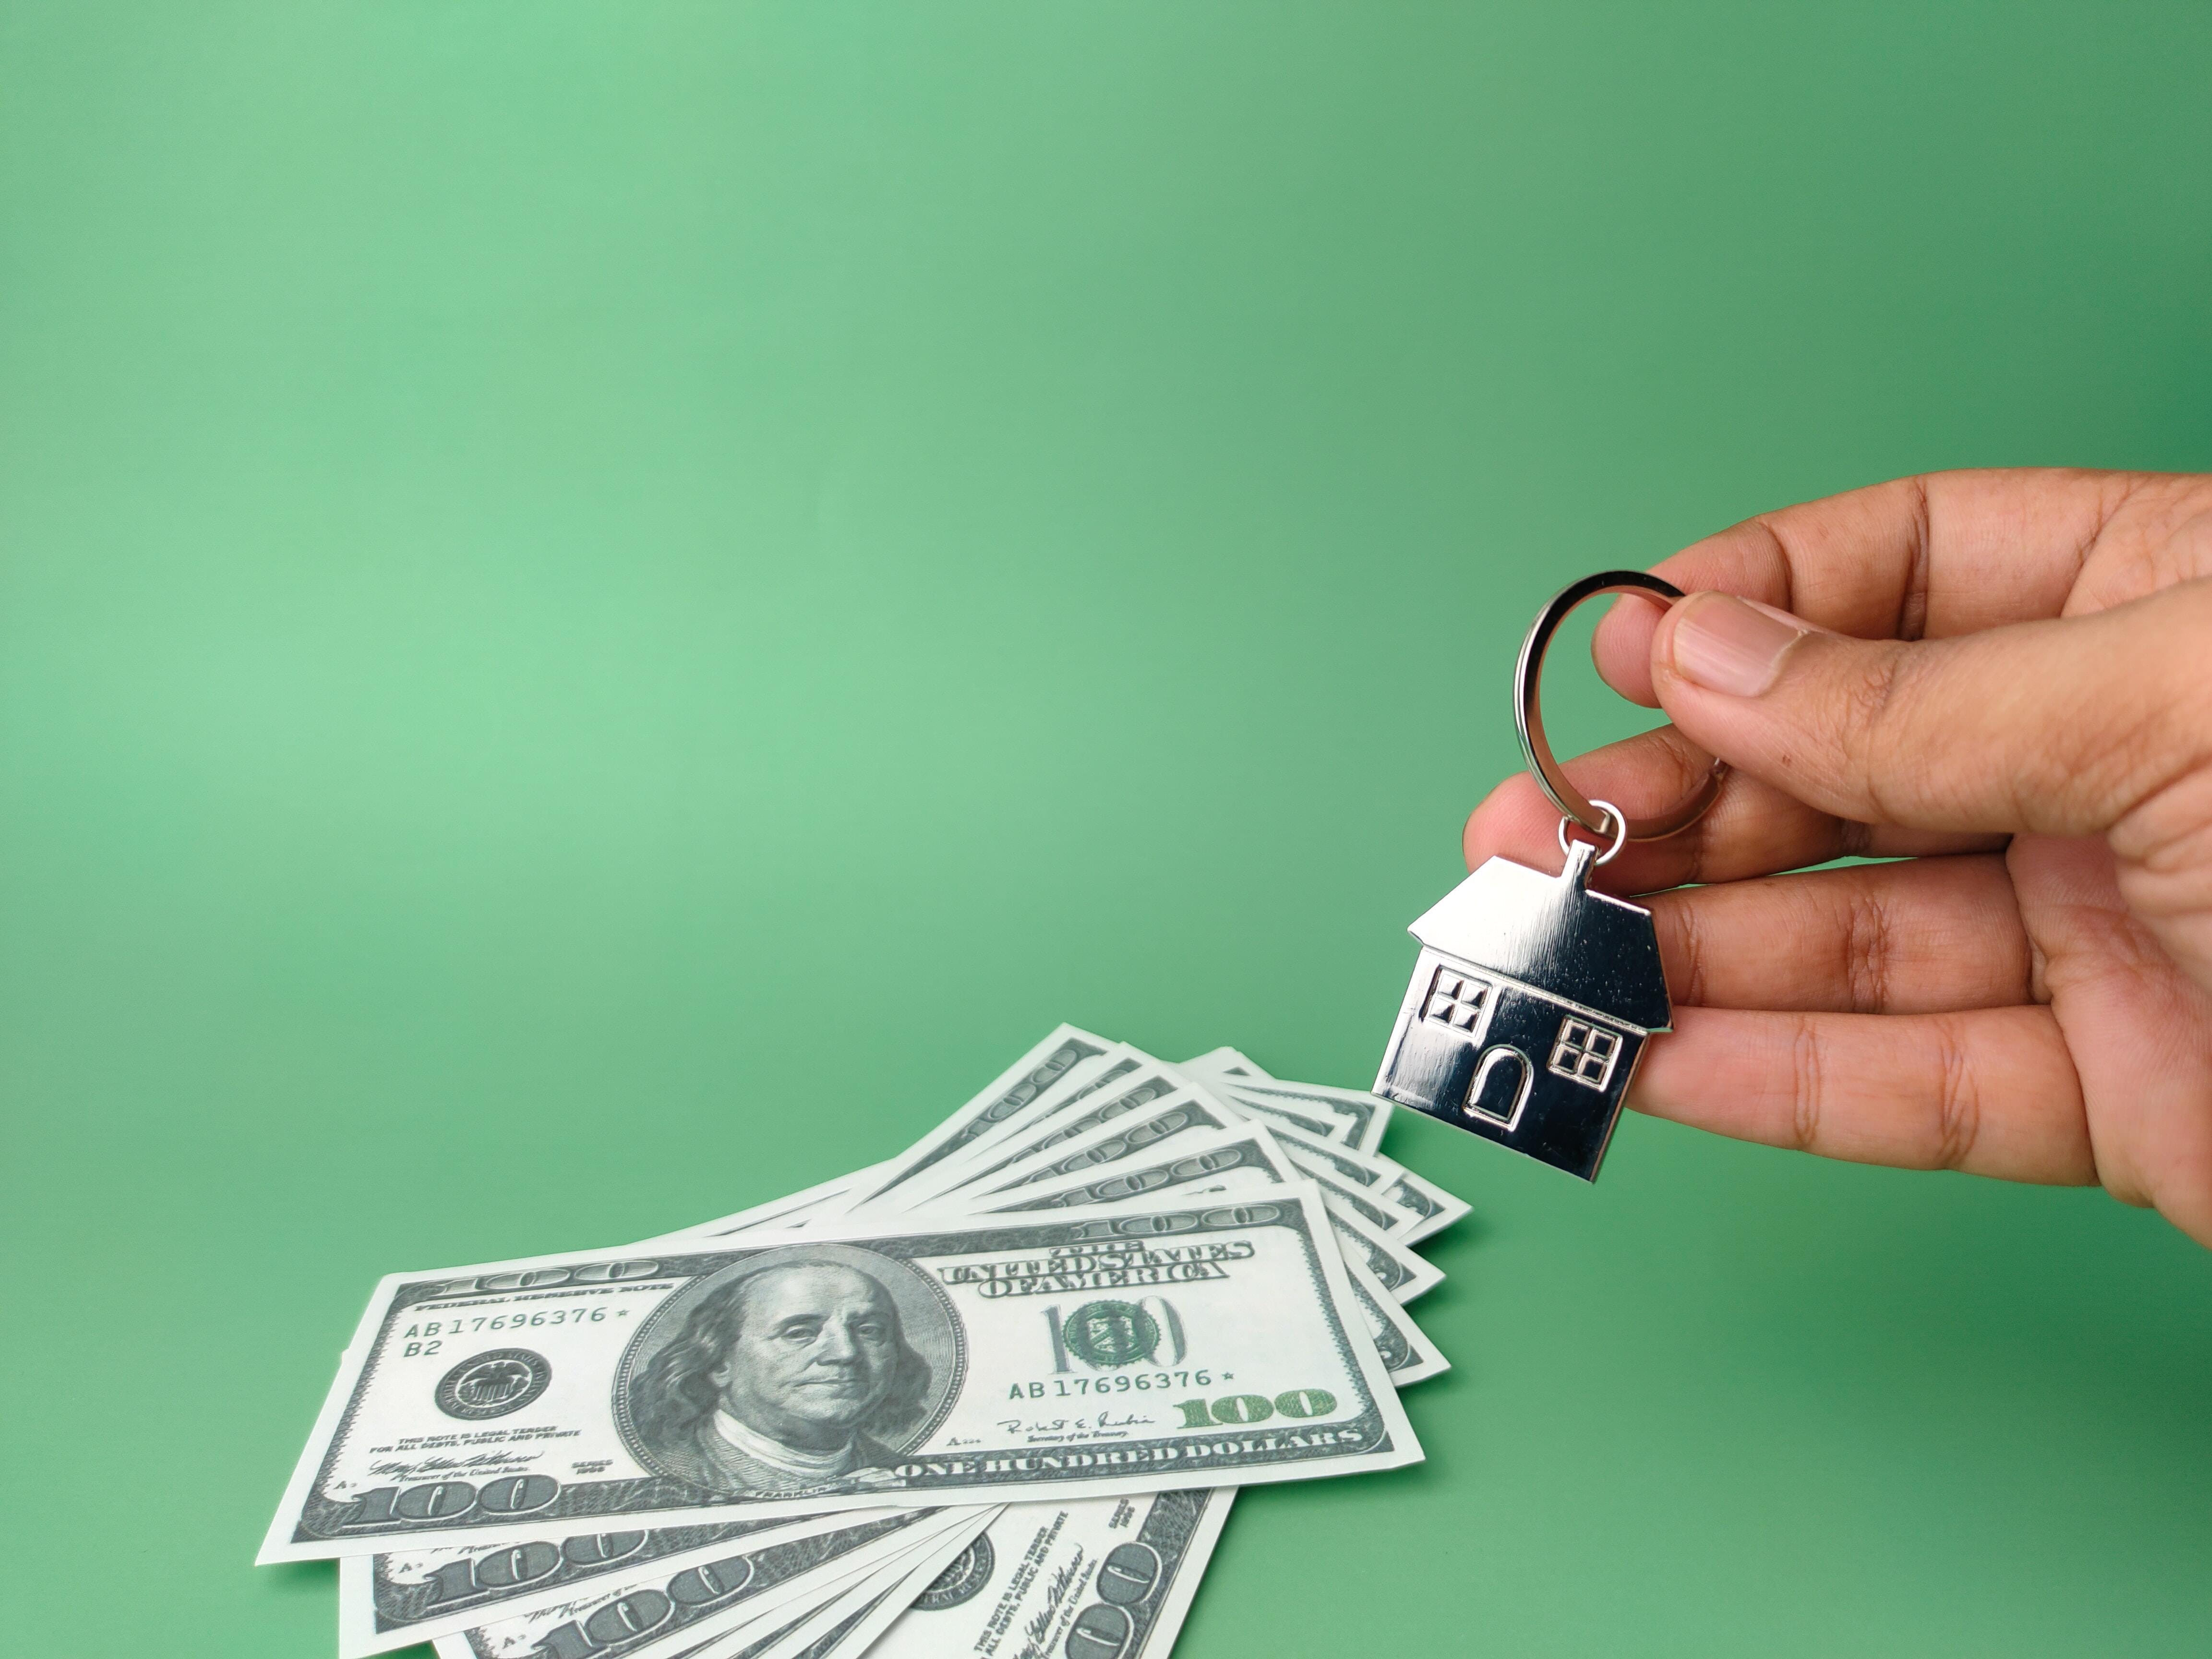 Several hundred-dollar bills on a green background and a hand holding a home-shaped keychain